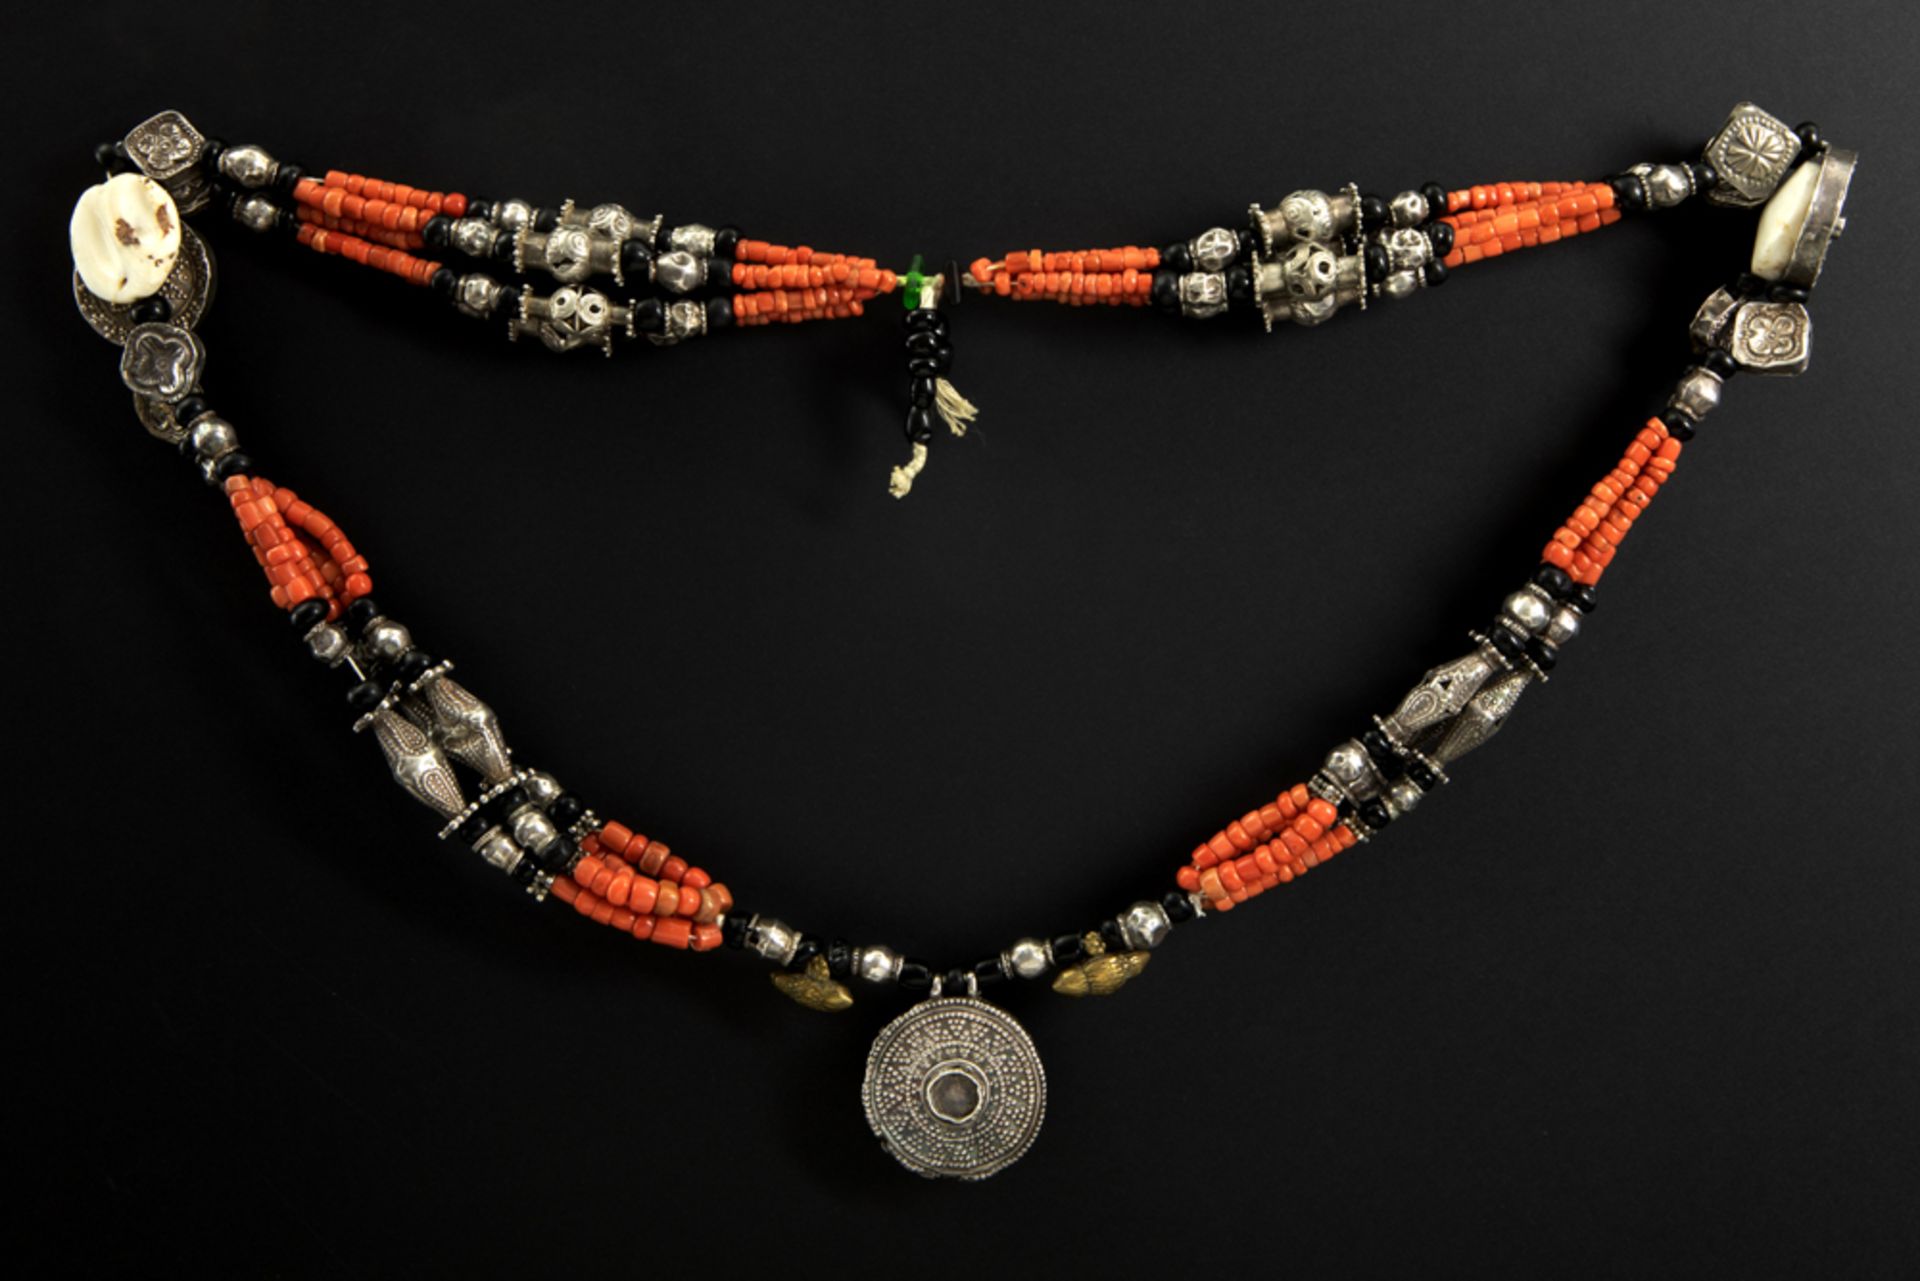 North African Berber silver necklace with beads in coral, bone and silver || Noord-Afrikaanse Berber